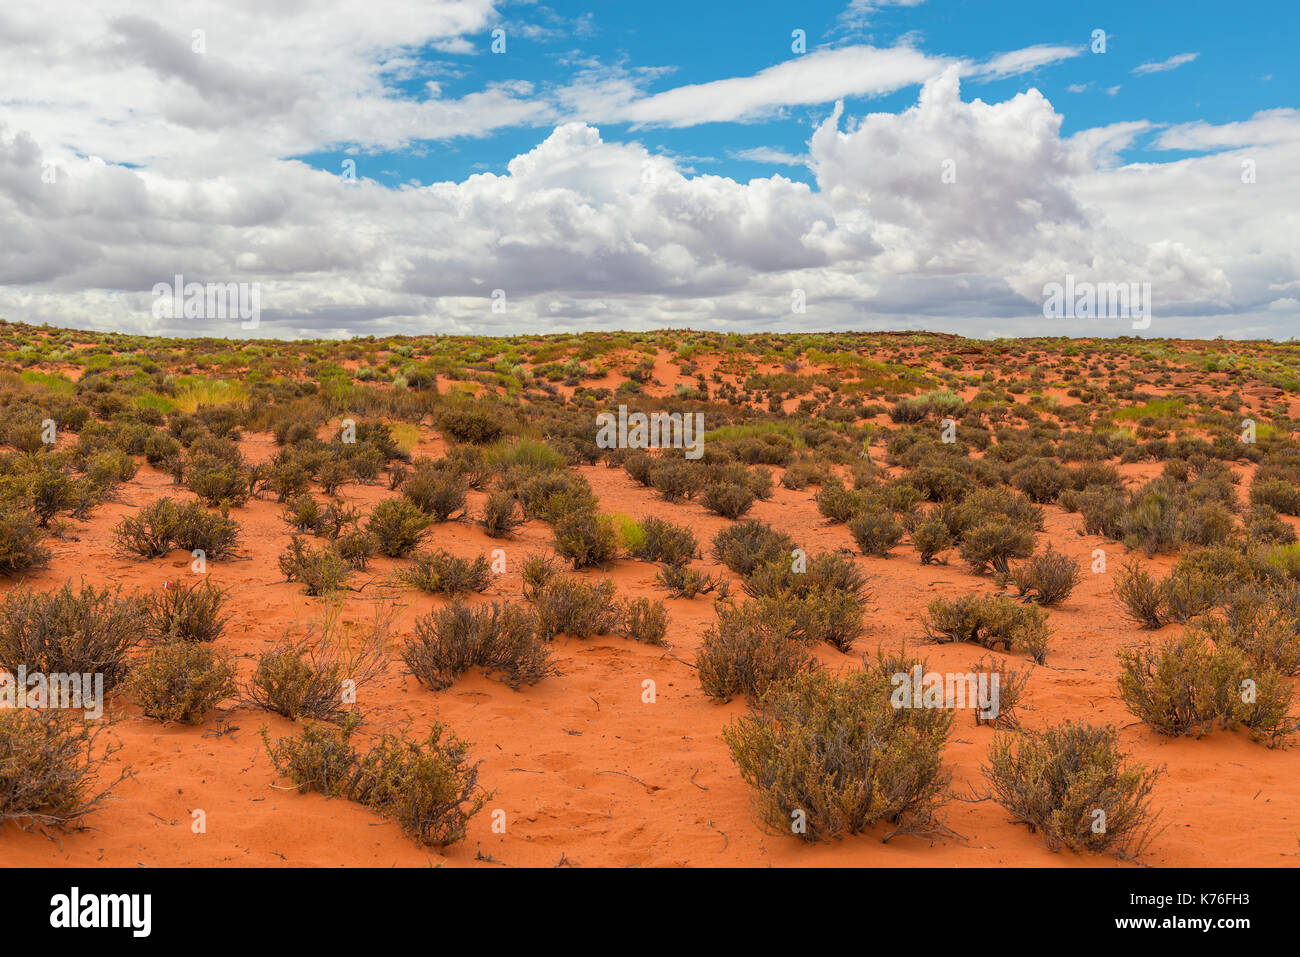 Typical landscape of the arid desert climate of Arizona with its bushes, USA. Stock Photo